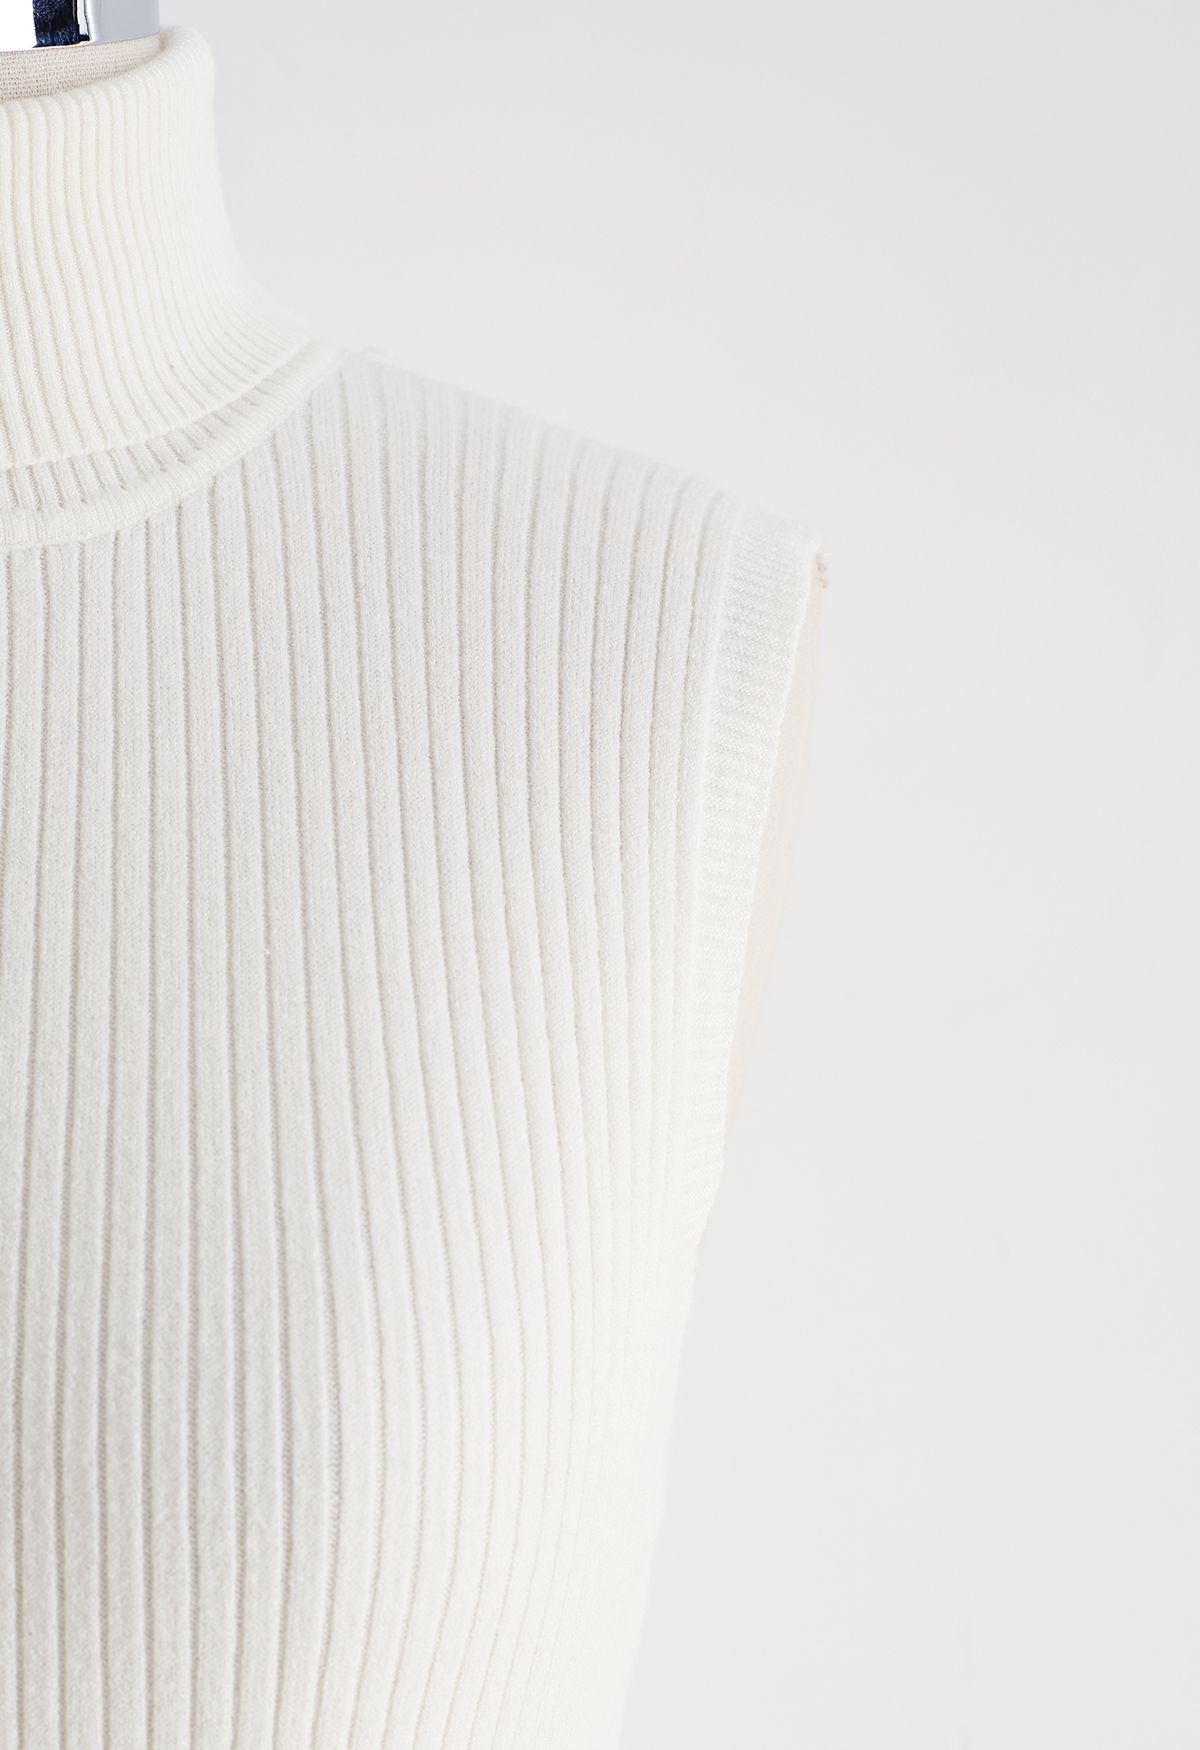 Turtleneck Soft Knit Sleeveless Top in White - Retro, Indie and Unique ...